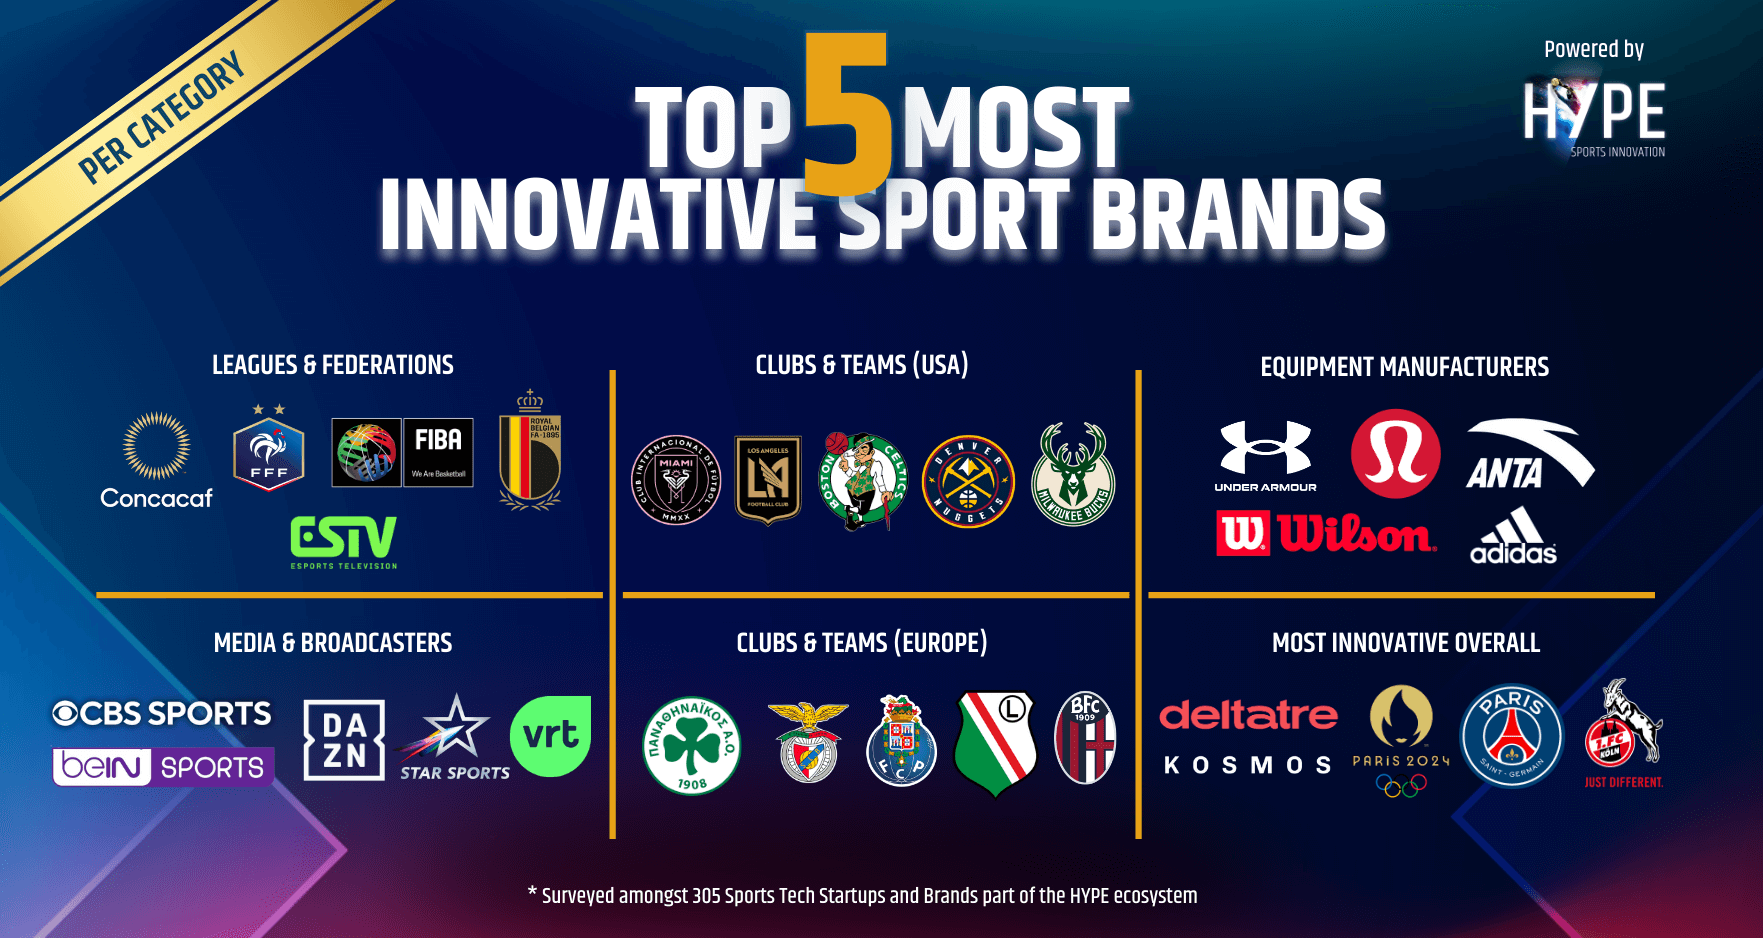 TOP 5 MOST INNOVATIVE SPORTS BRANDS